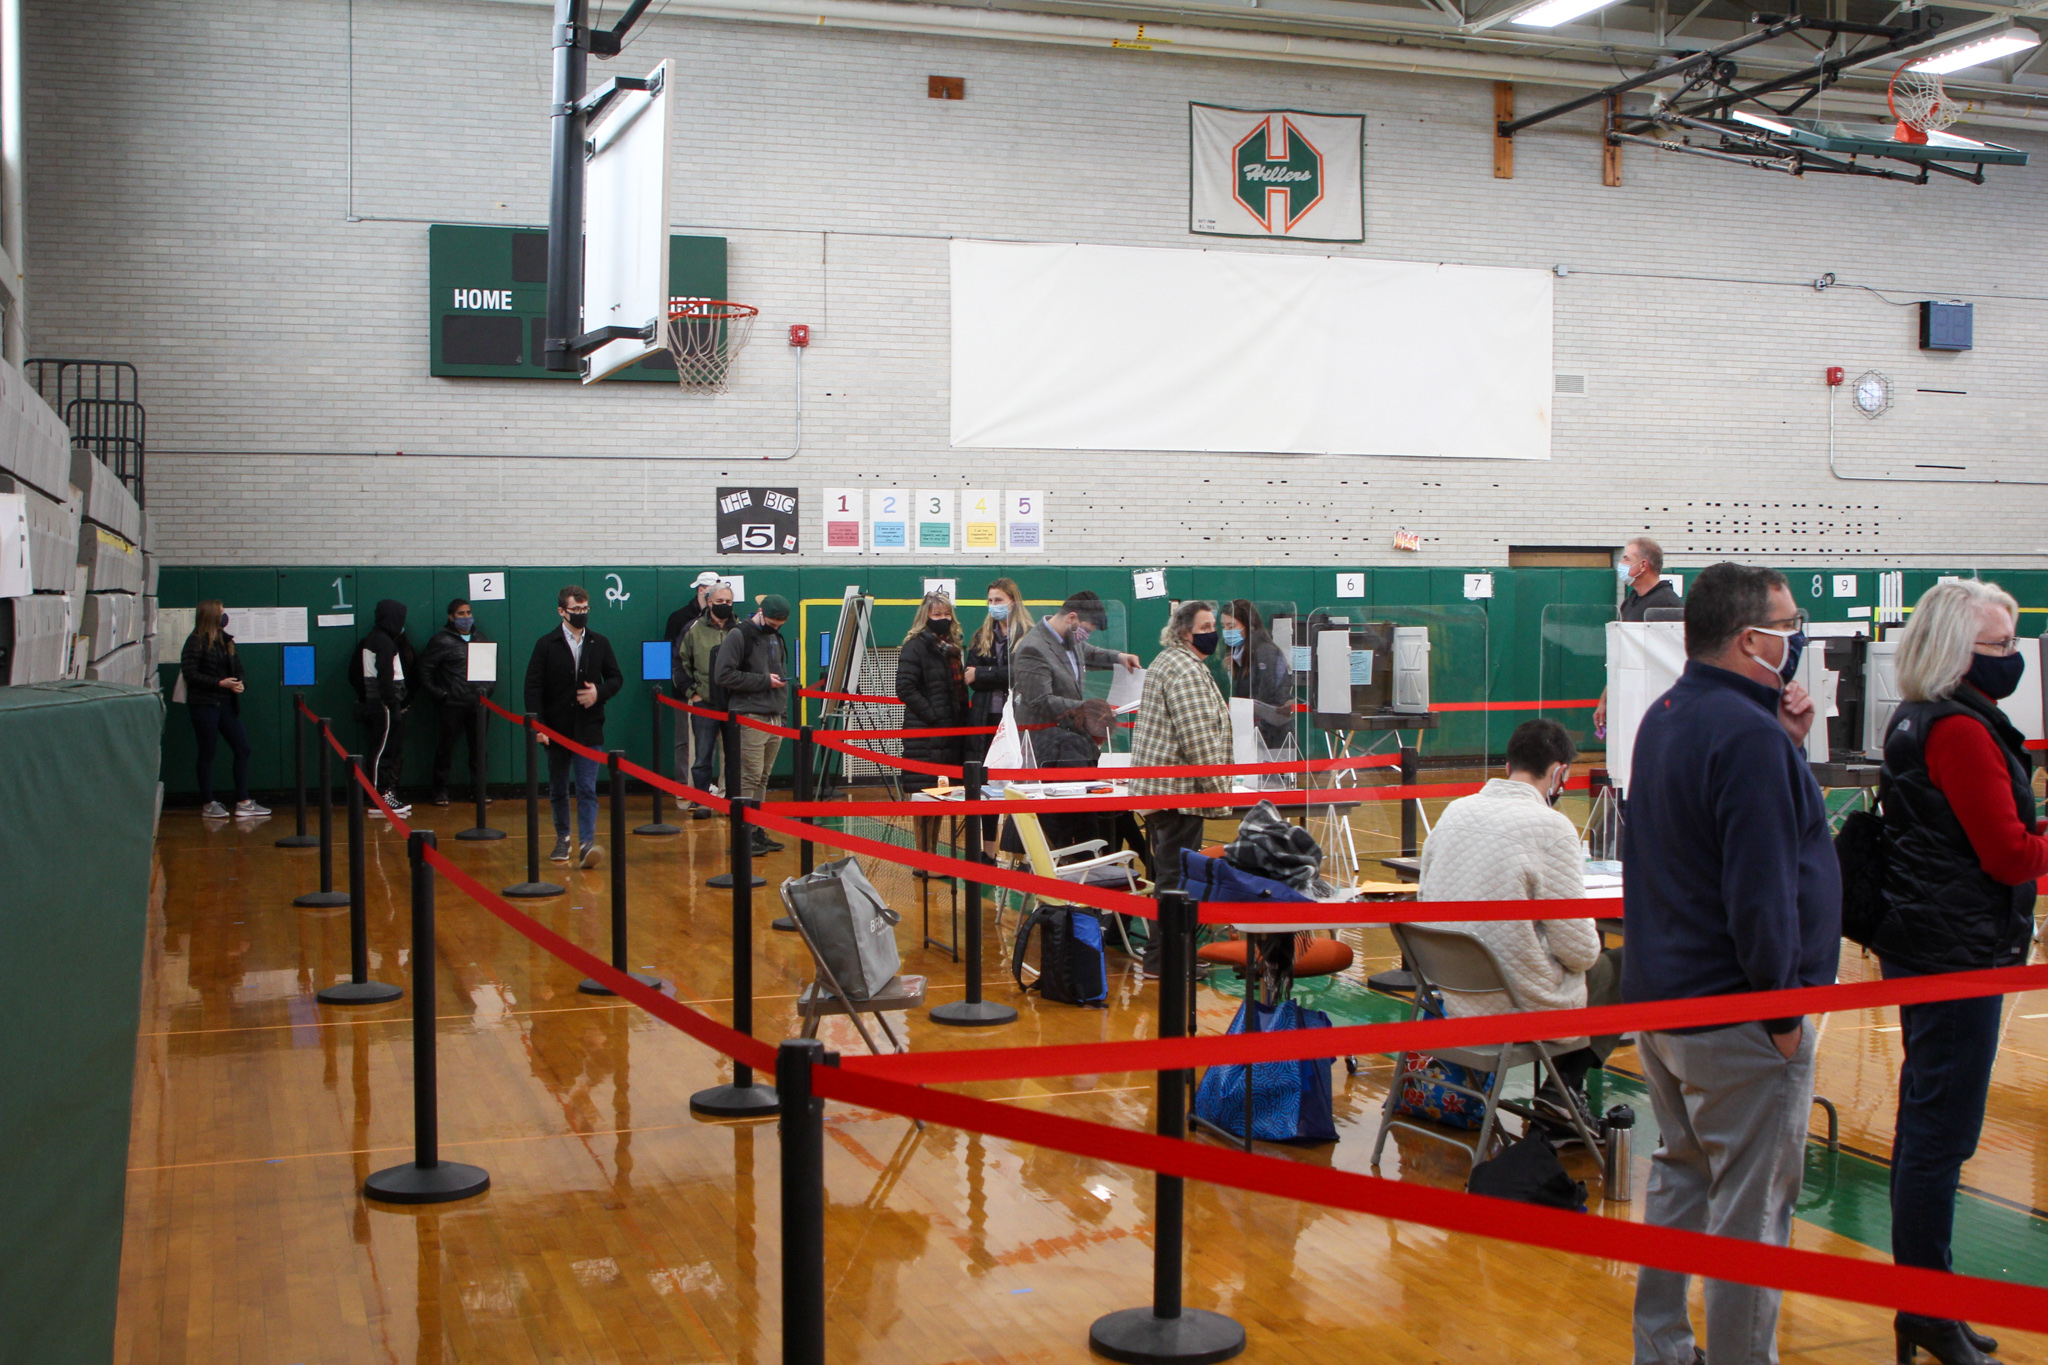 Balloting over, but anxiety continues for voters in Hopkinton as well as nation